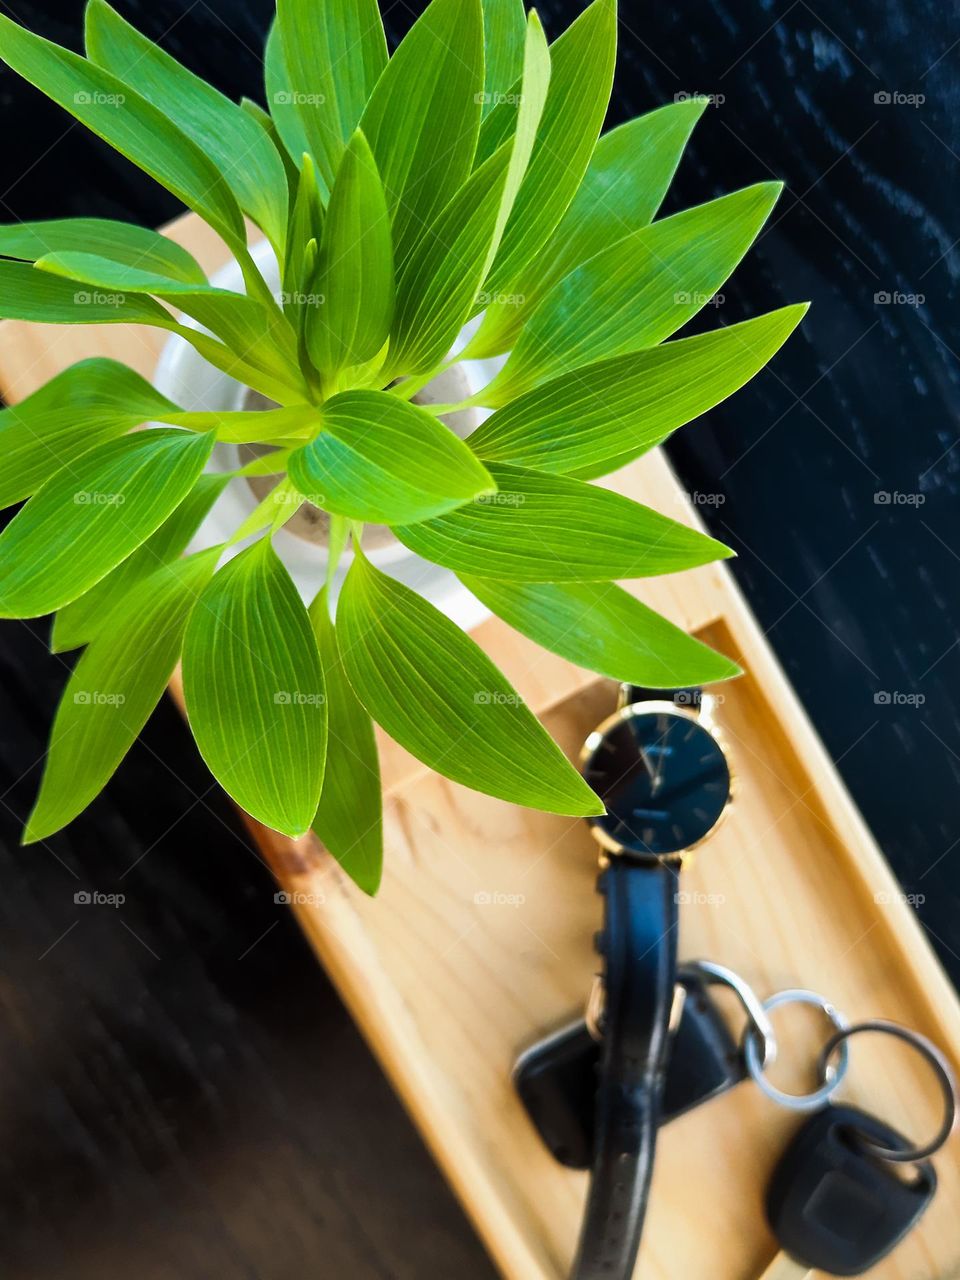 Desk organiser with small green beautiful plant with a white vase. Greenery on your desk.